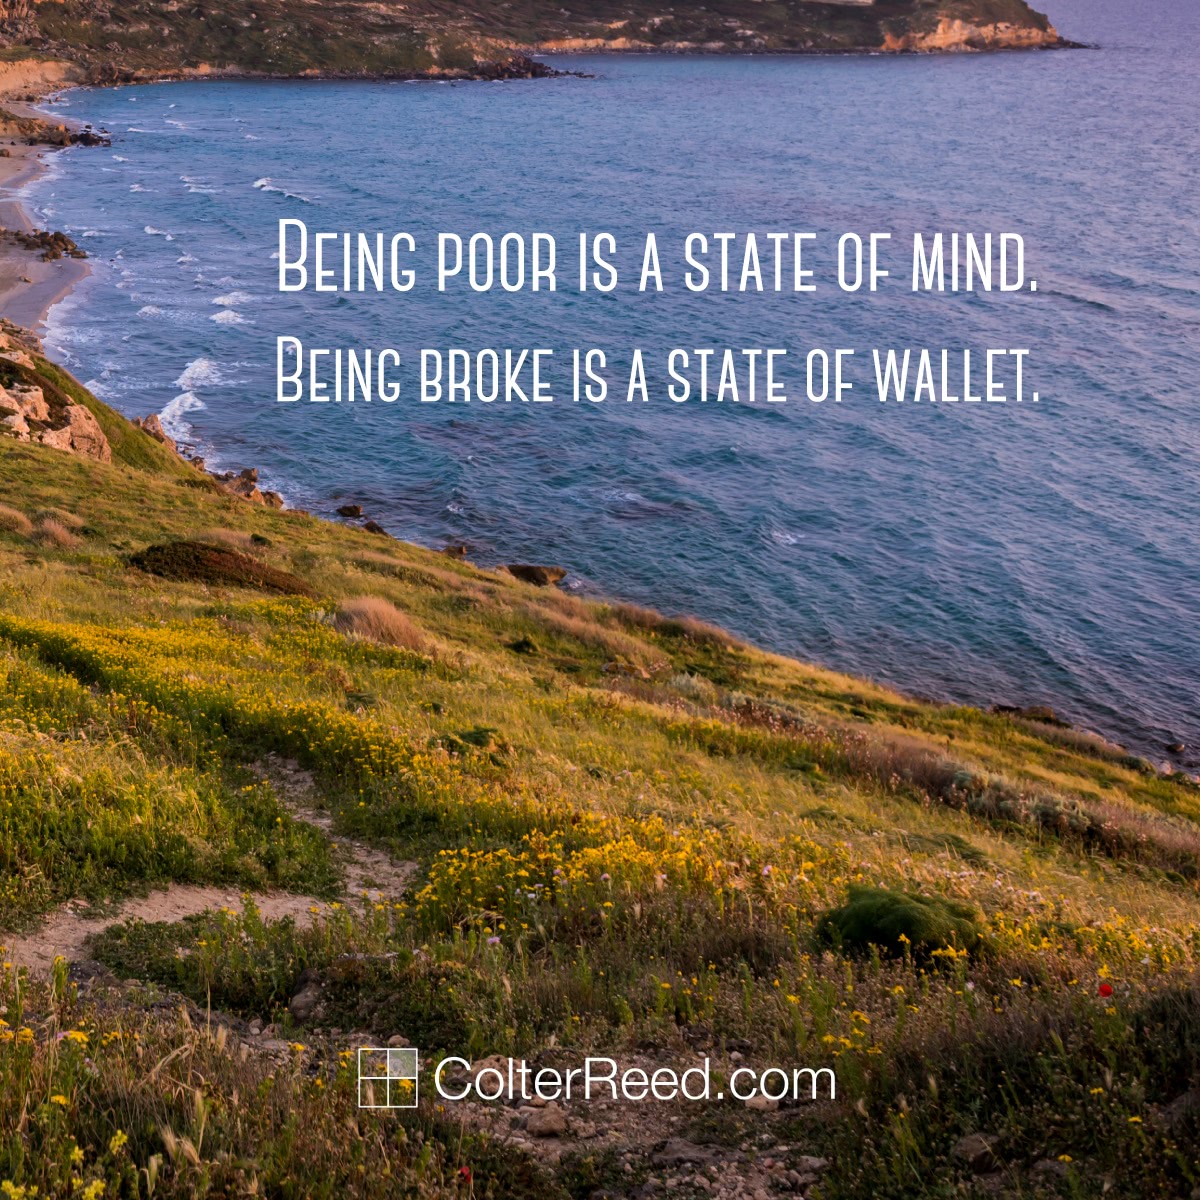 Being poor is a state of mind. Being broke is a state of wallet.